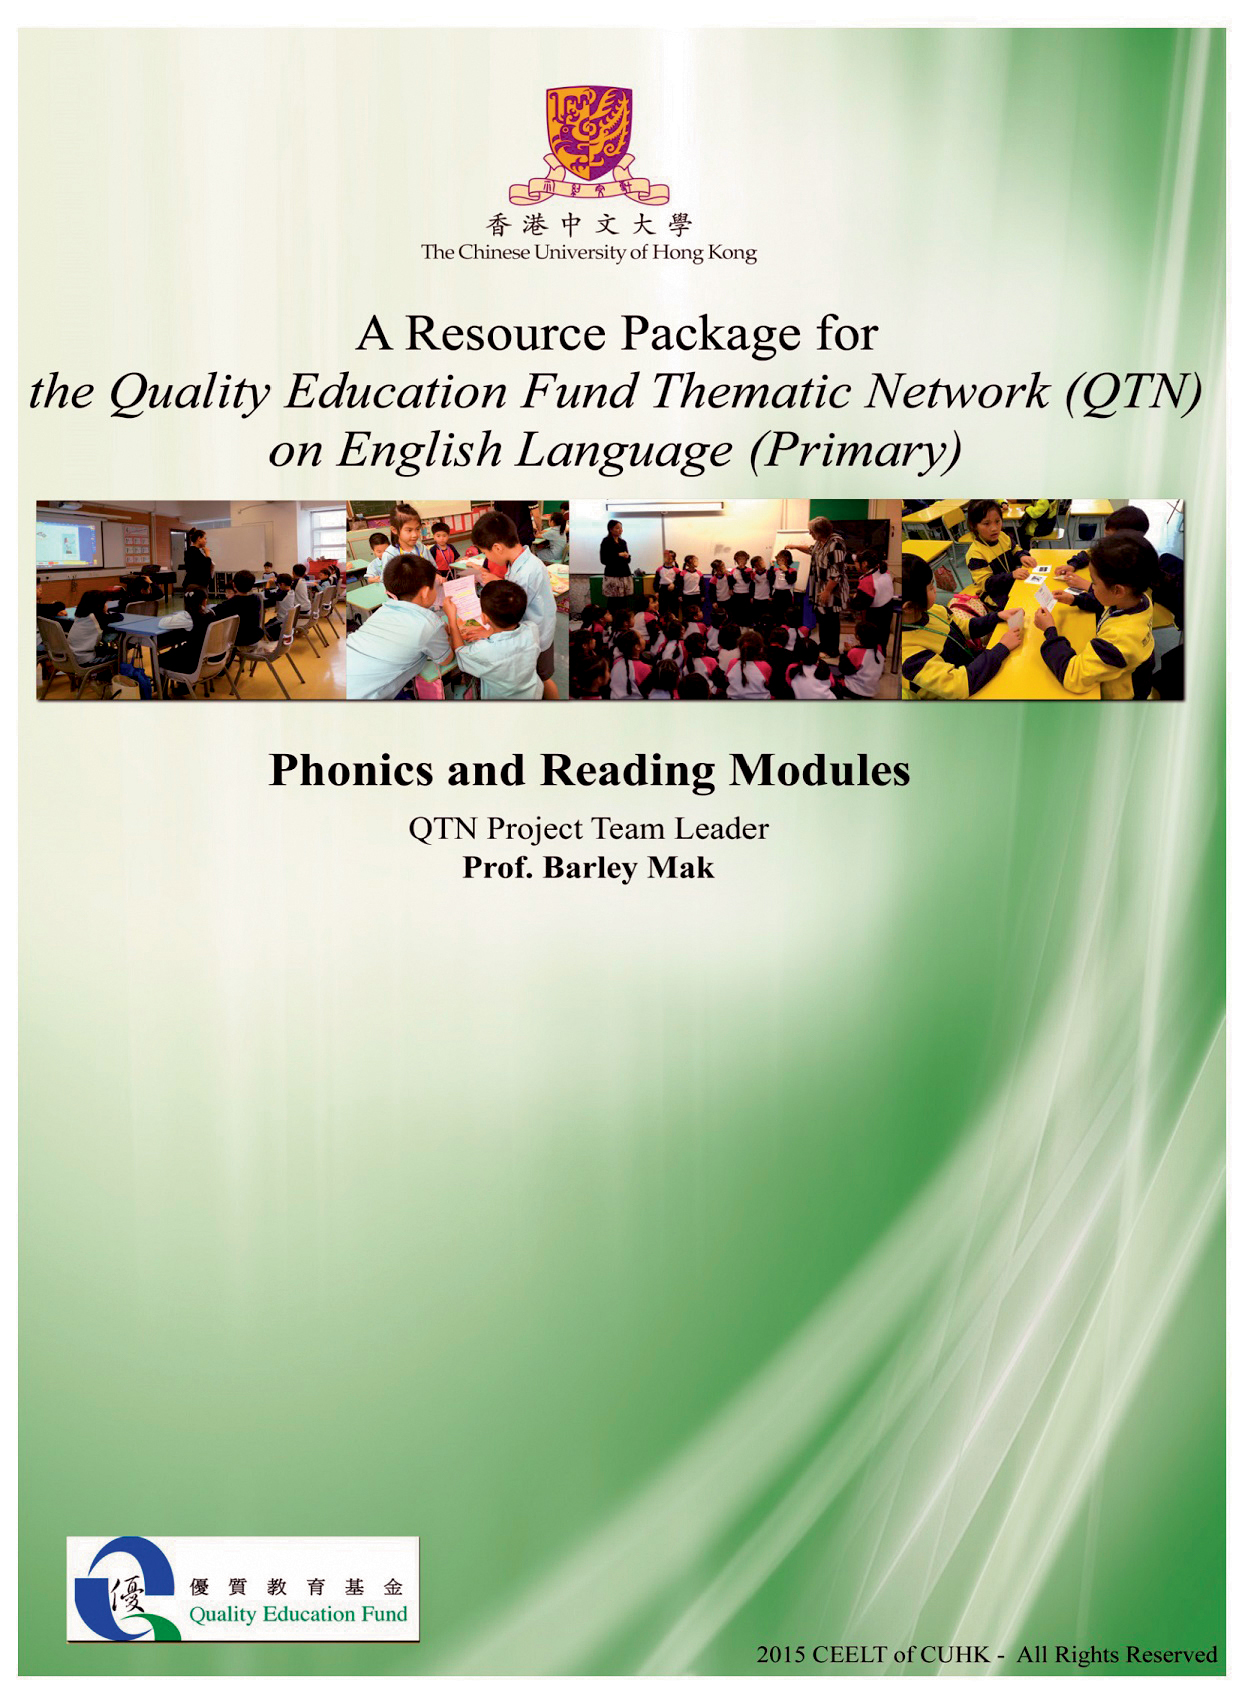 A Resource Package for Quality Education Fund 
Thematic Network (QTN) on English Language (Primary): 
Phonics and Reading Modules